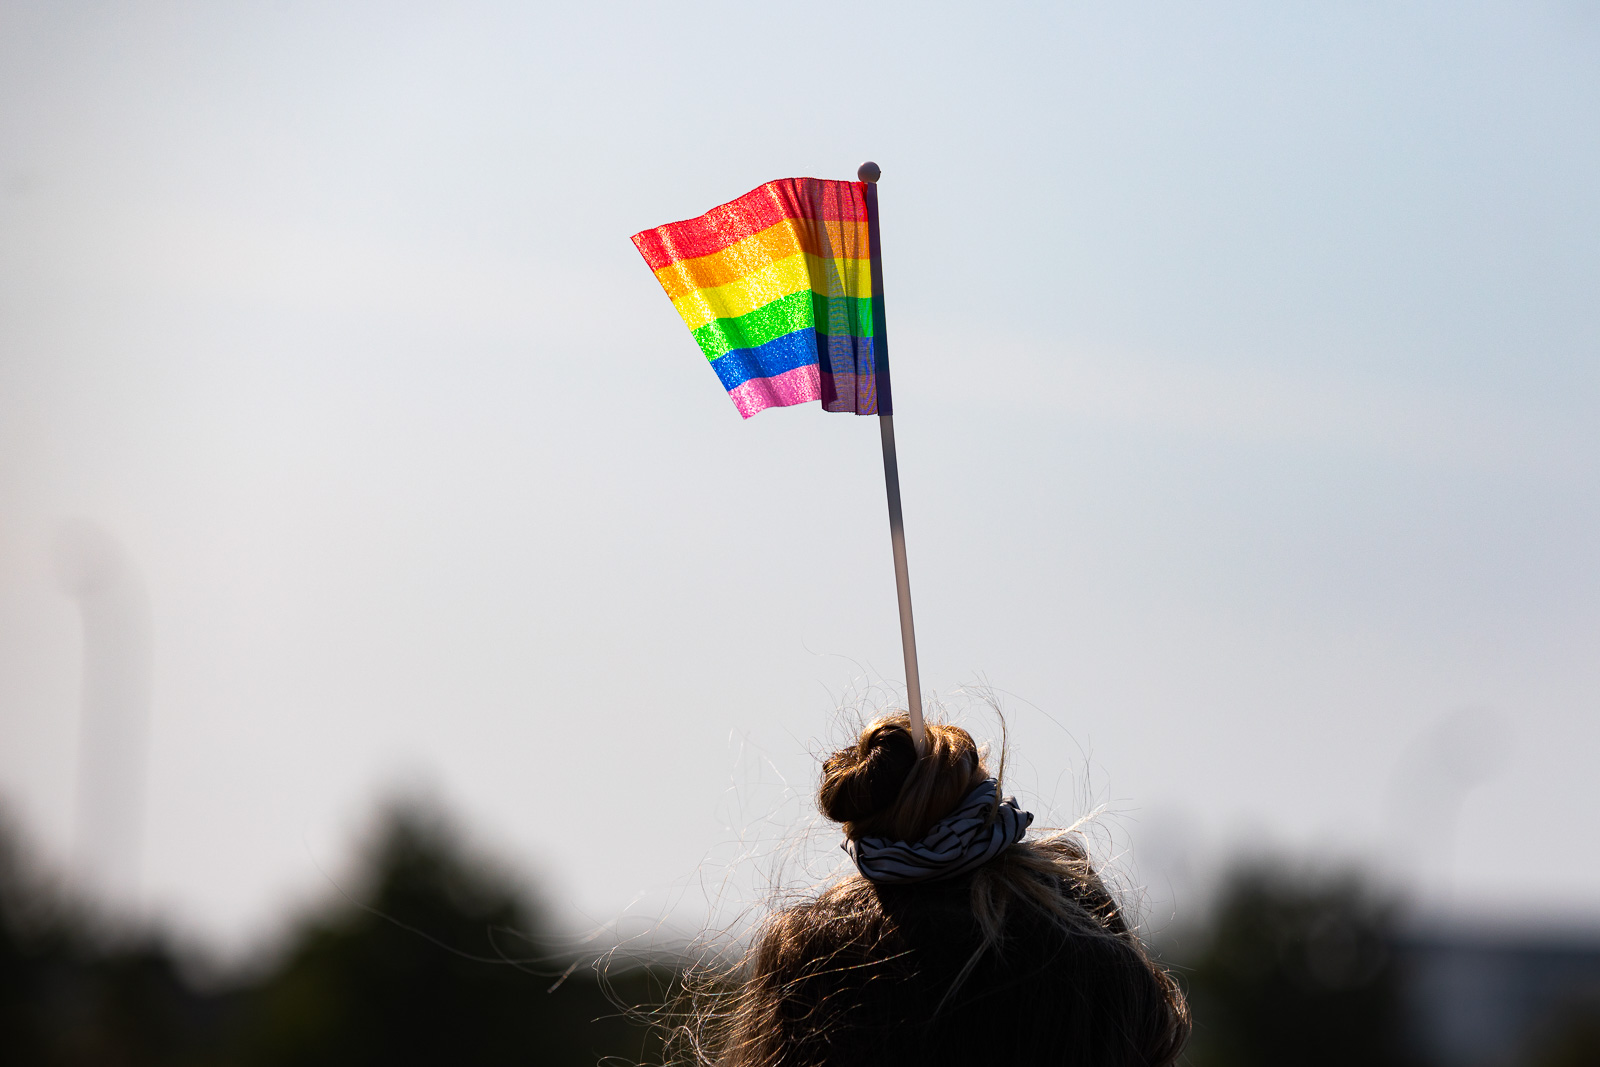 From Iceland – Many gay teenagers are bullied at school